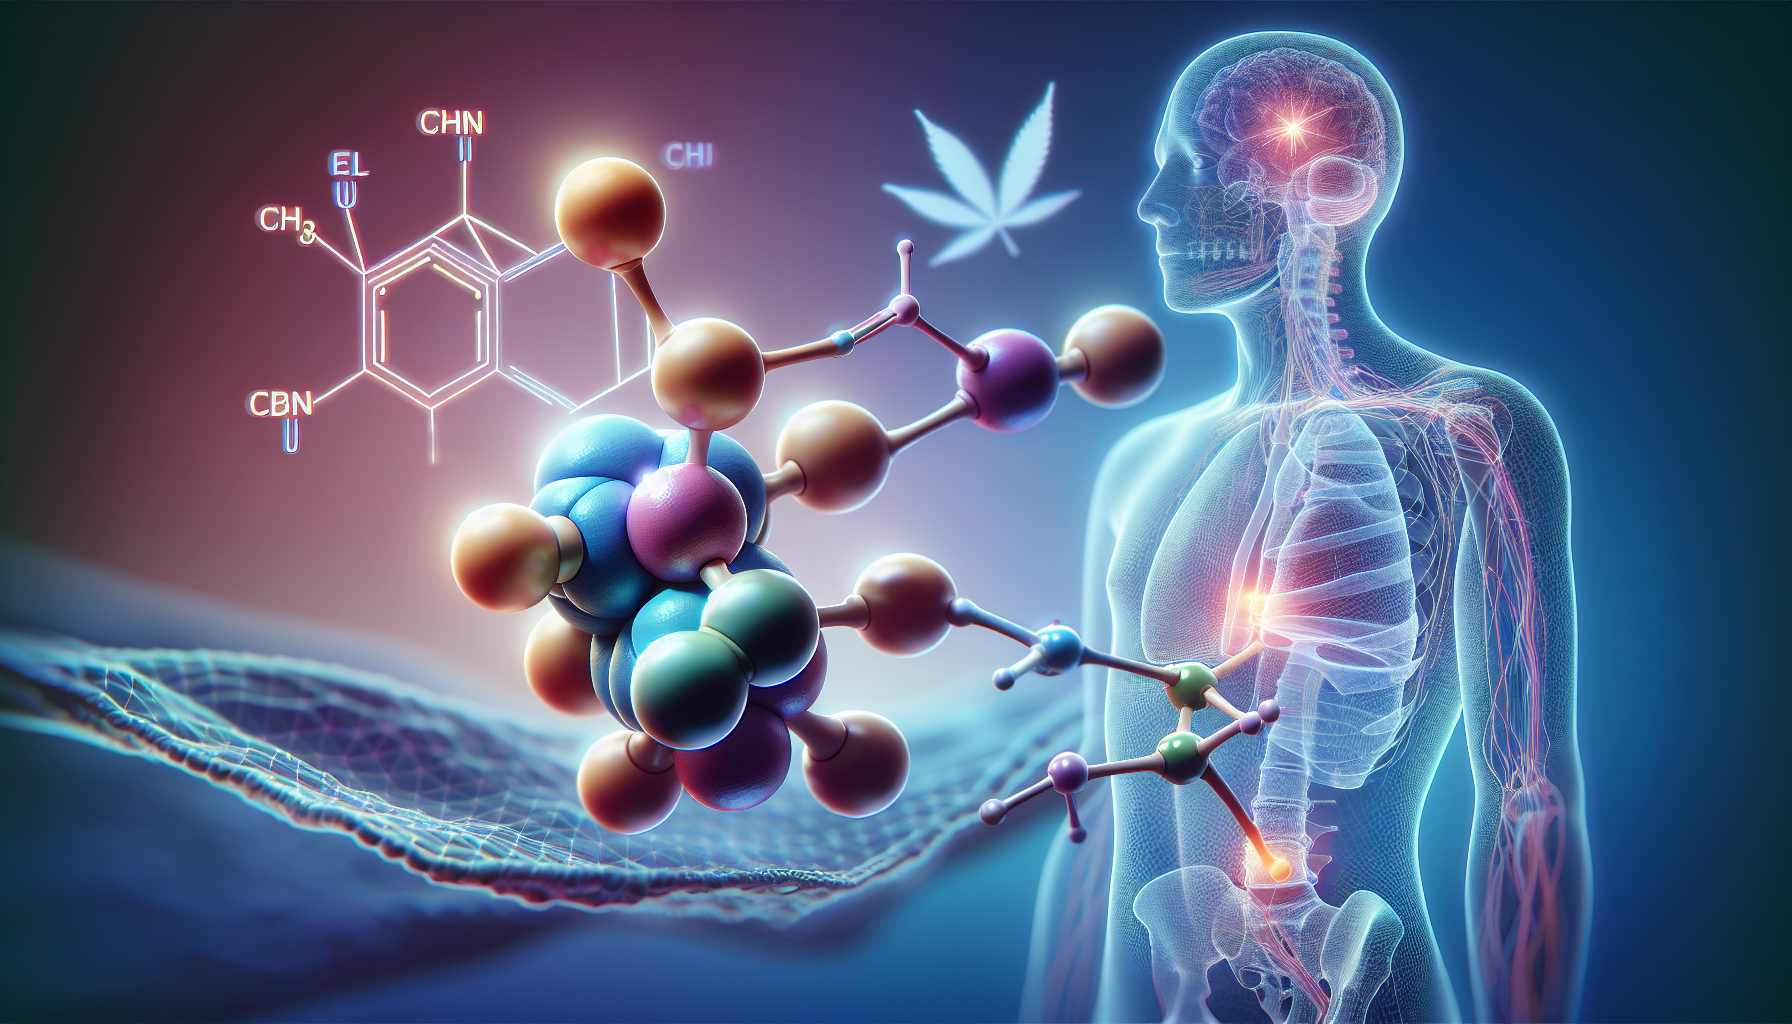 CBN molecular structure and endocannabinoid system